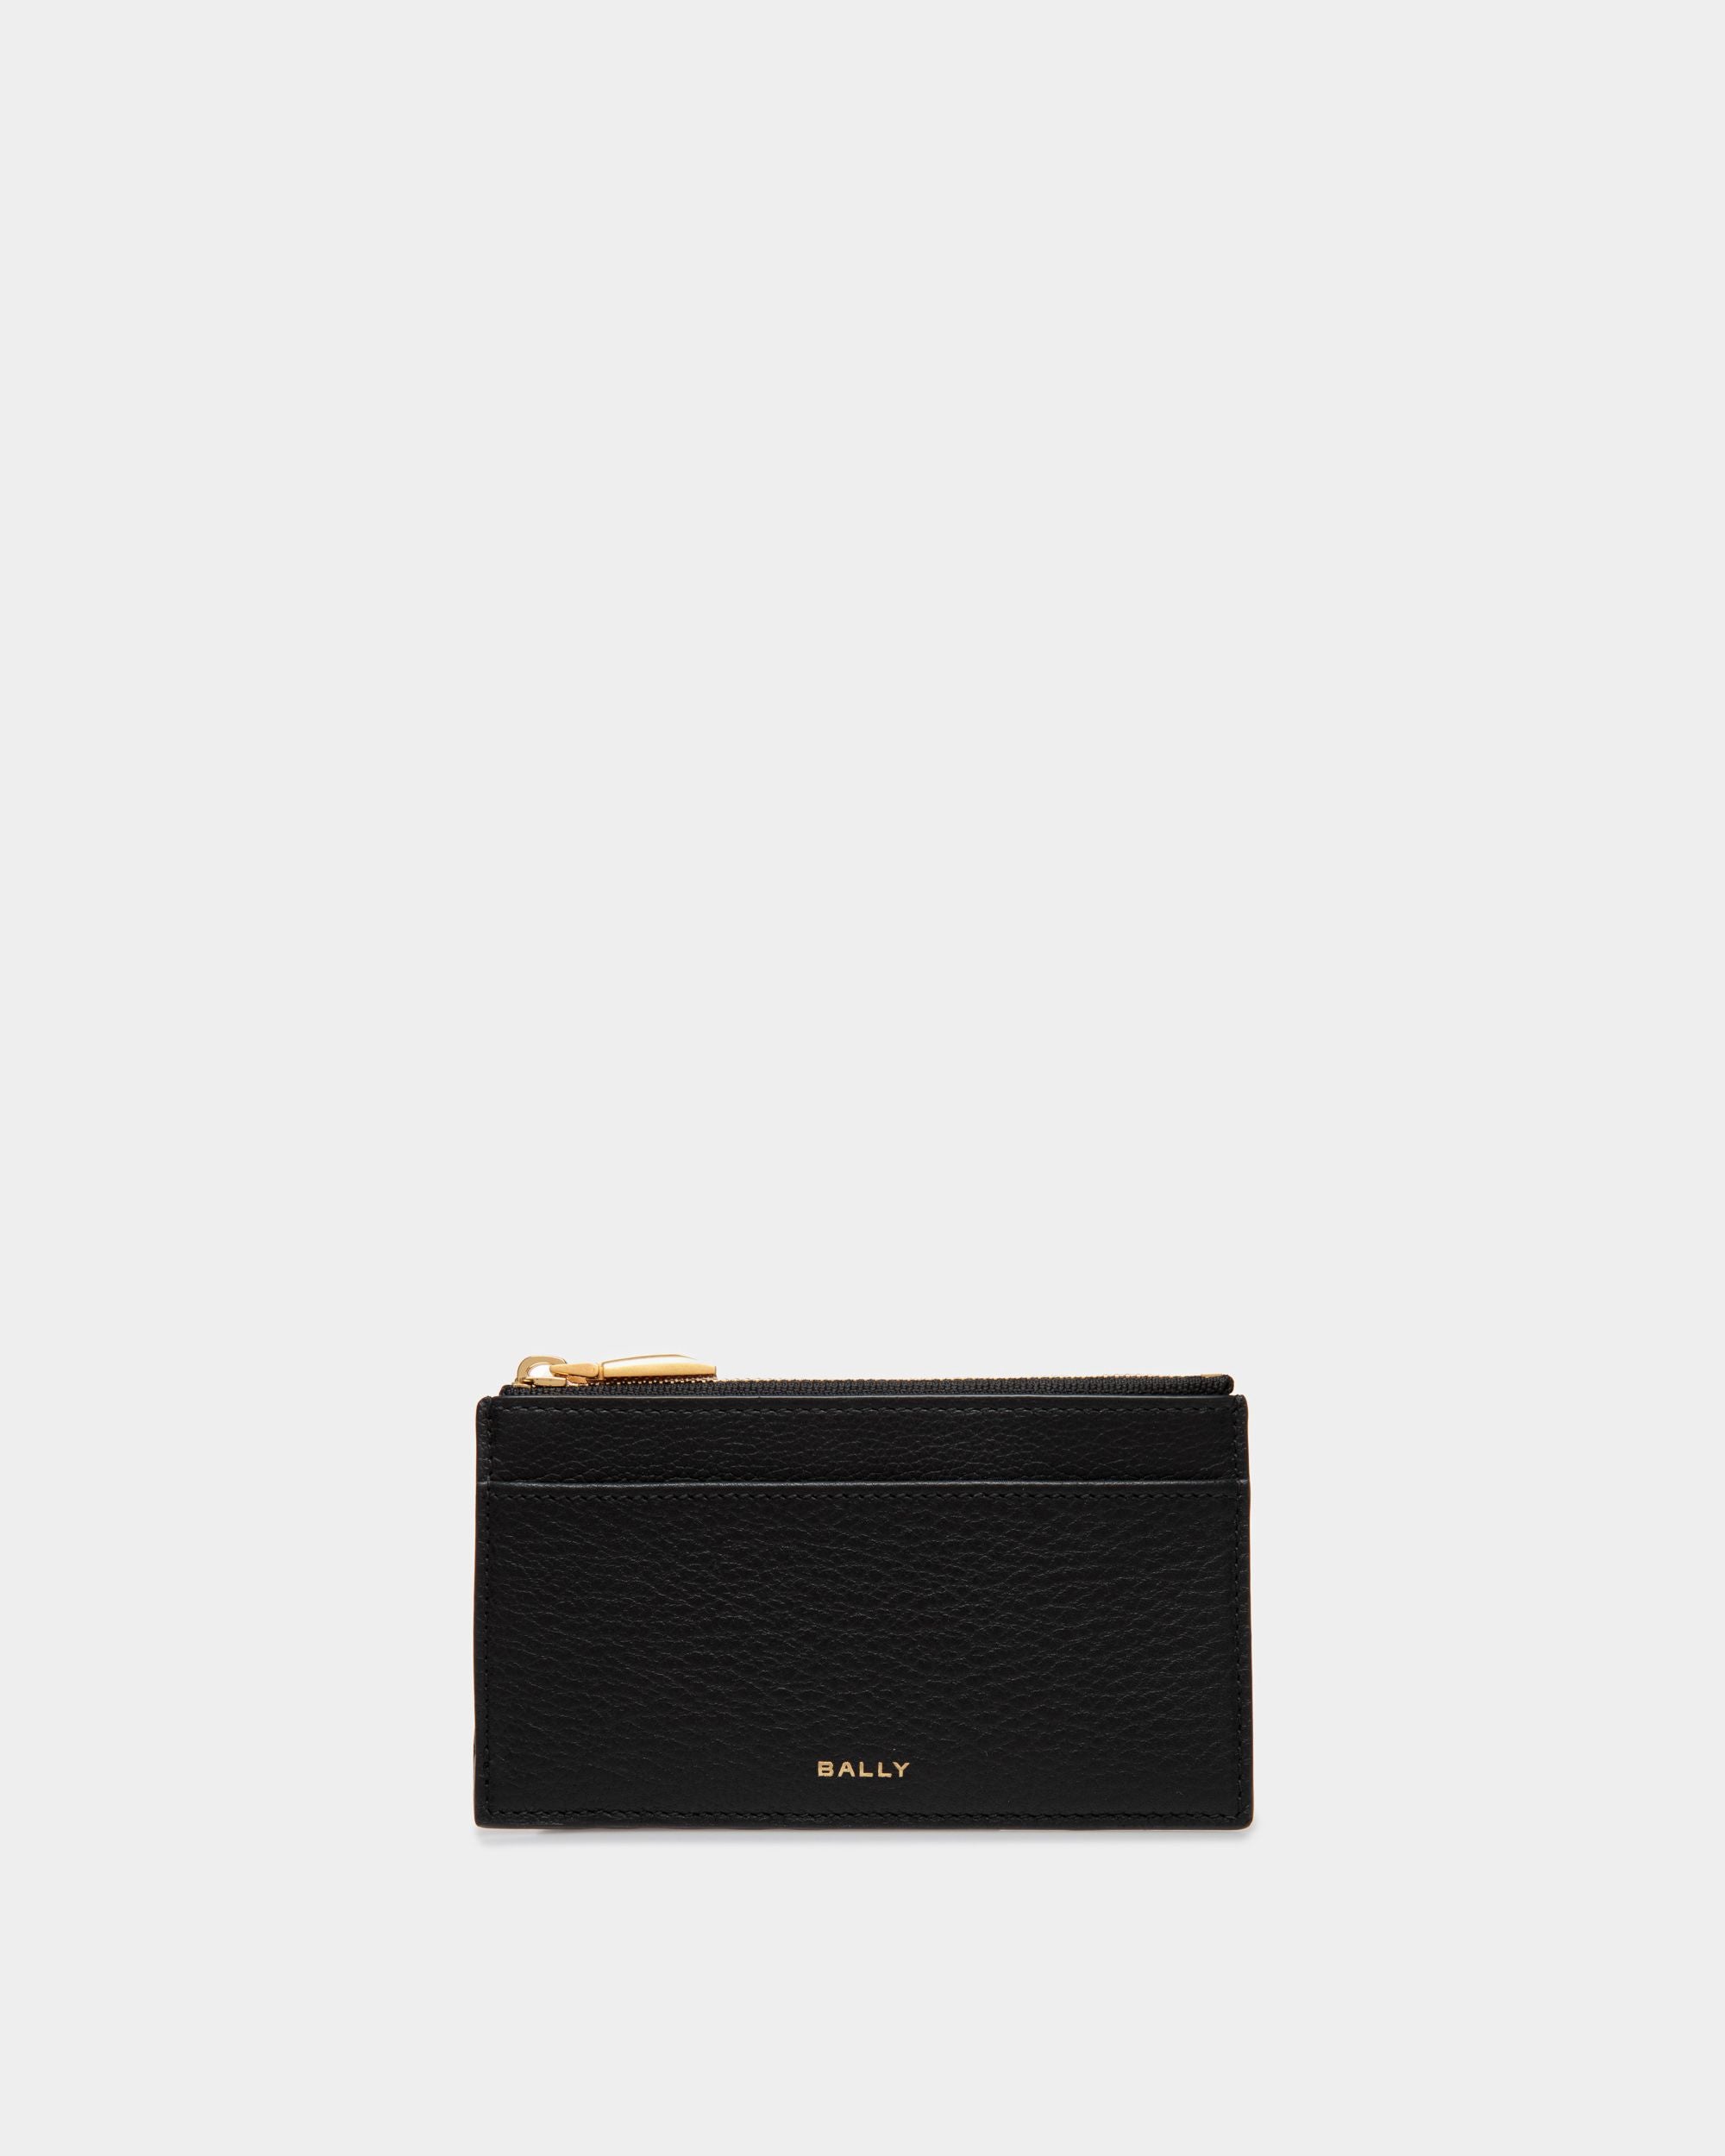 Men's 7 CC Zip Card Holder In Black Leather | Bally | Still Life Front